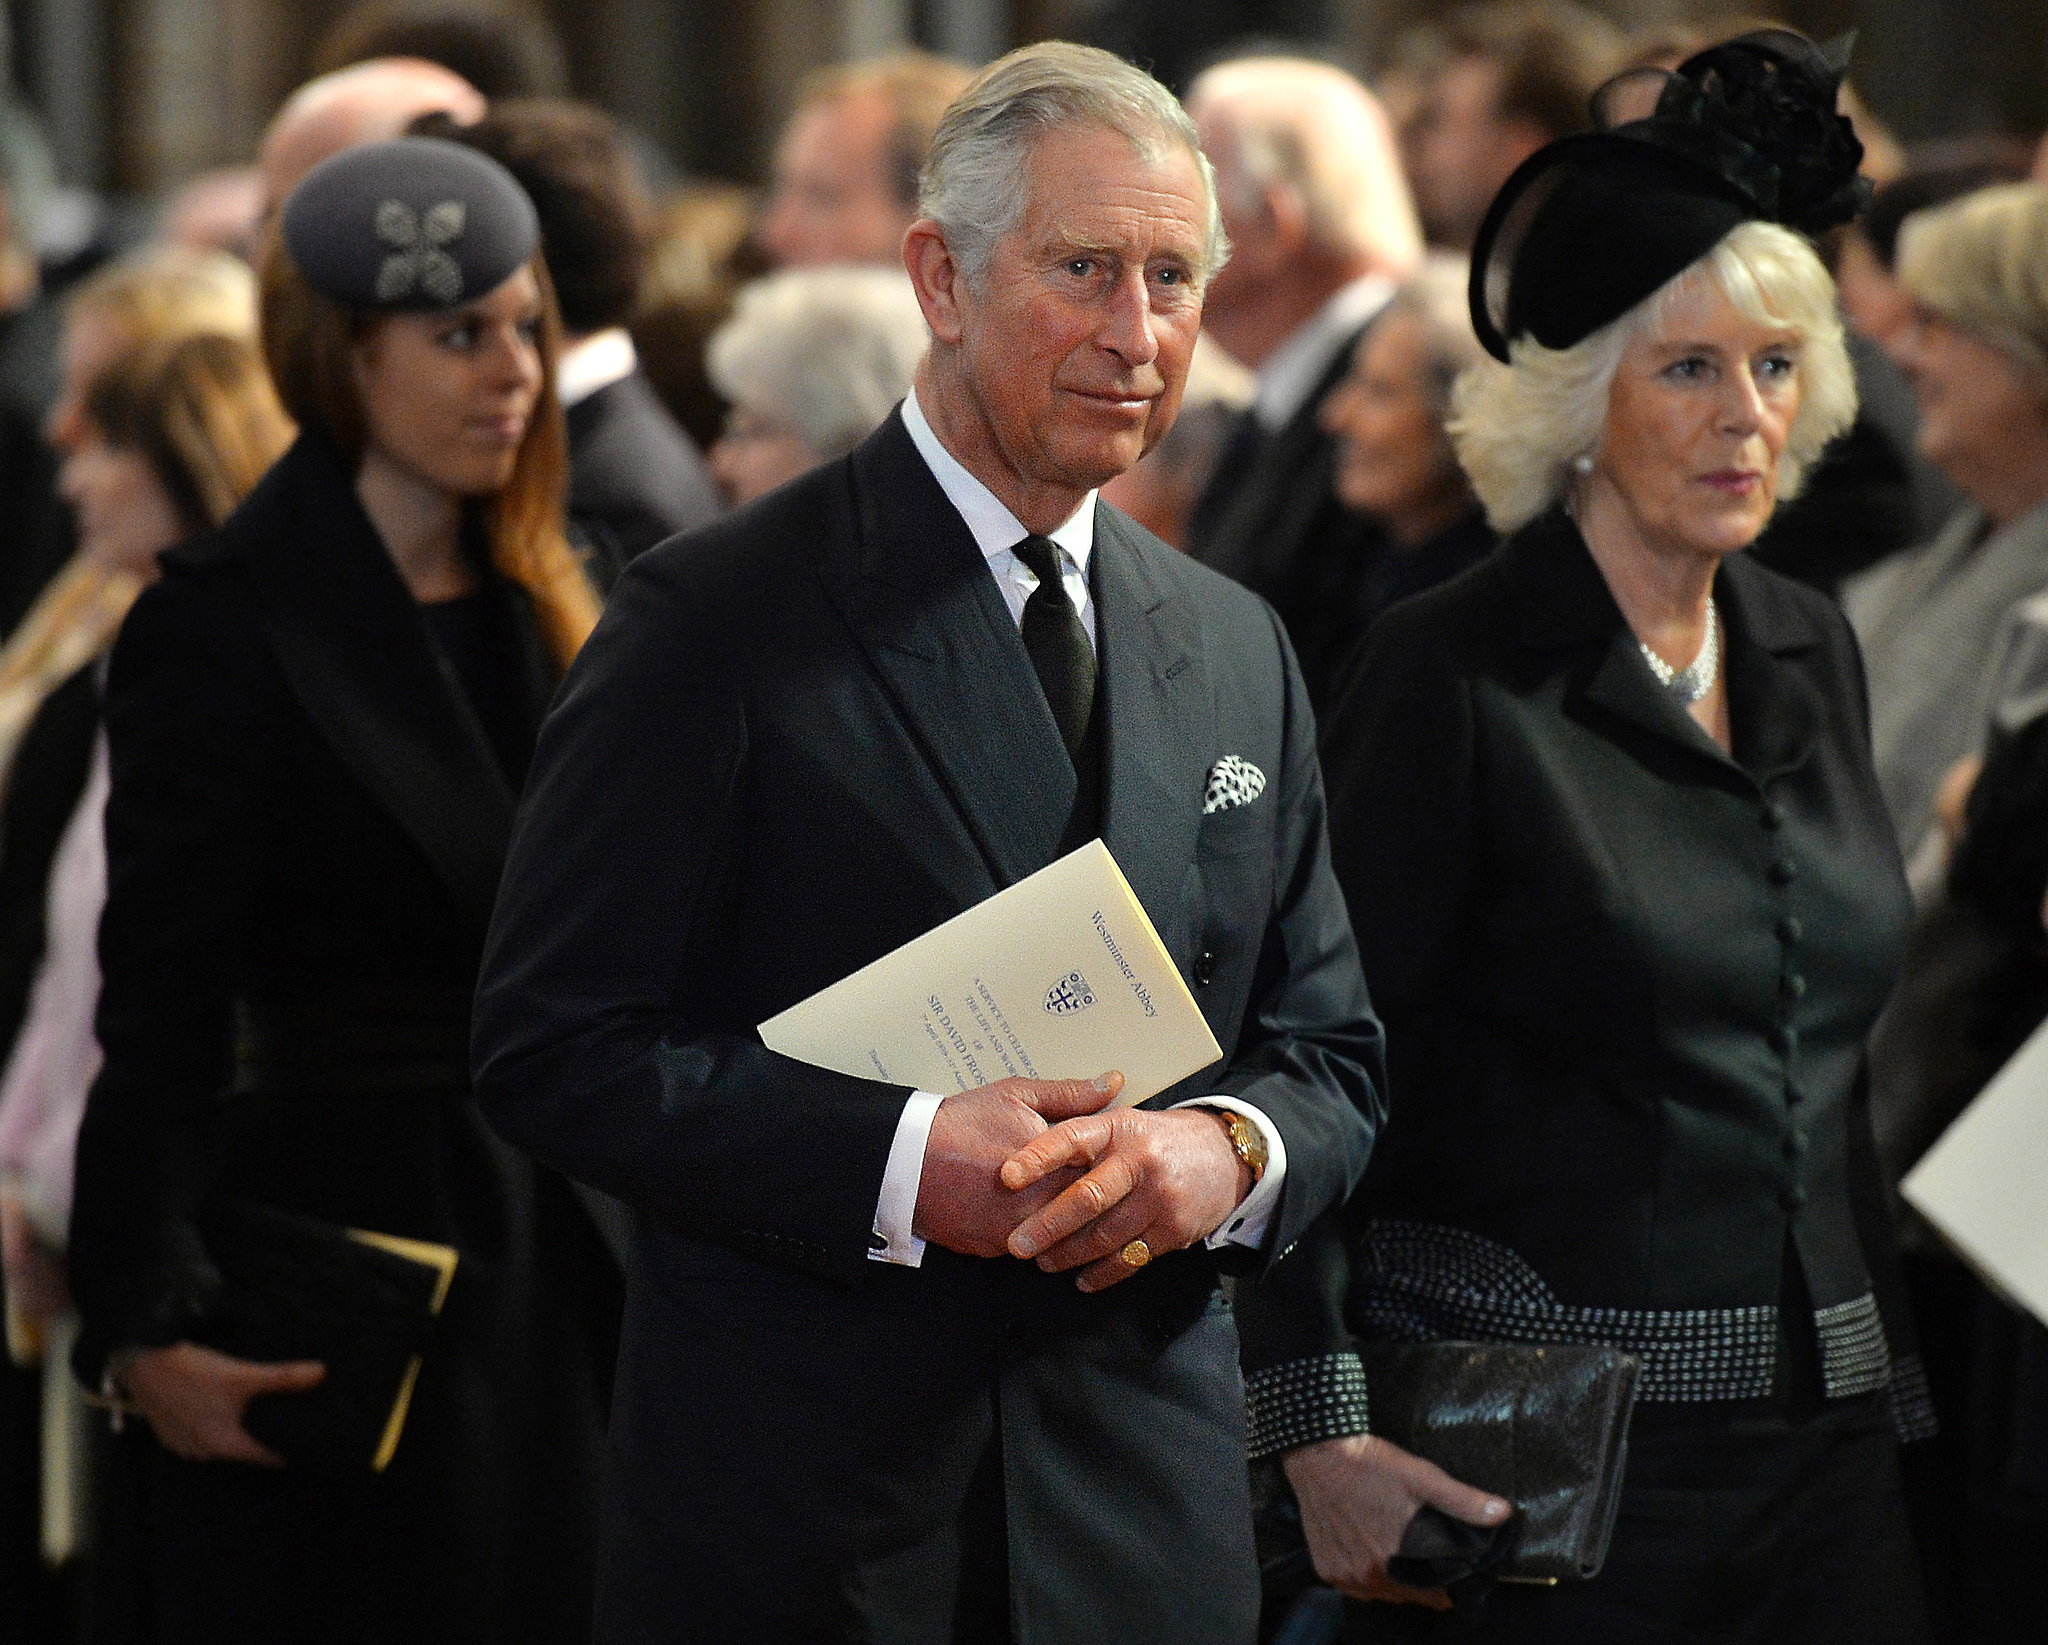 Prince Charles photo 20 of 25 pics, wallpaper - photo #694530 - ThePlace2